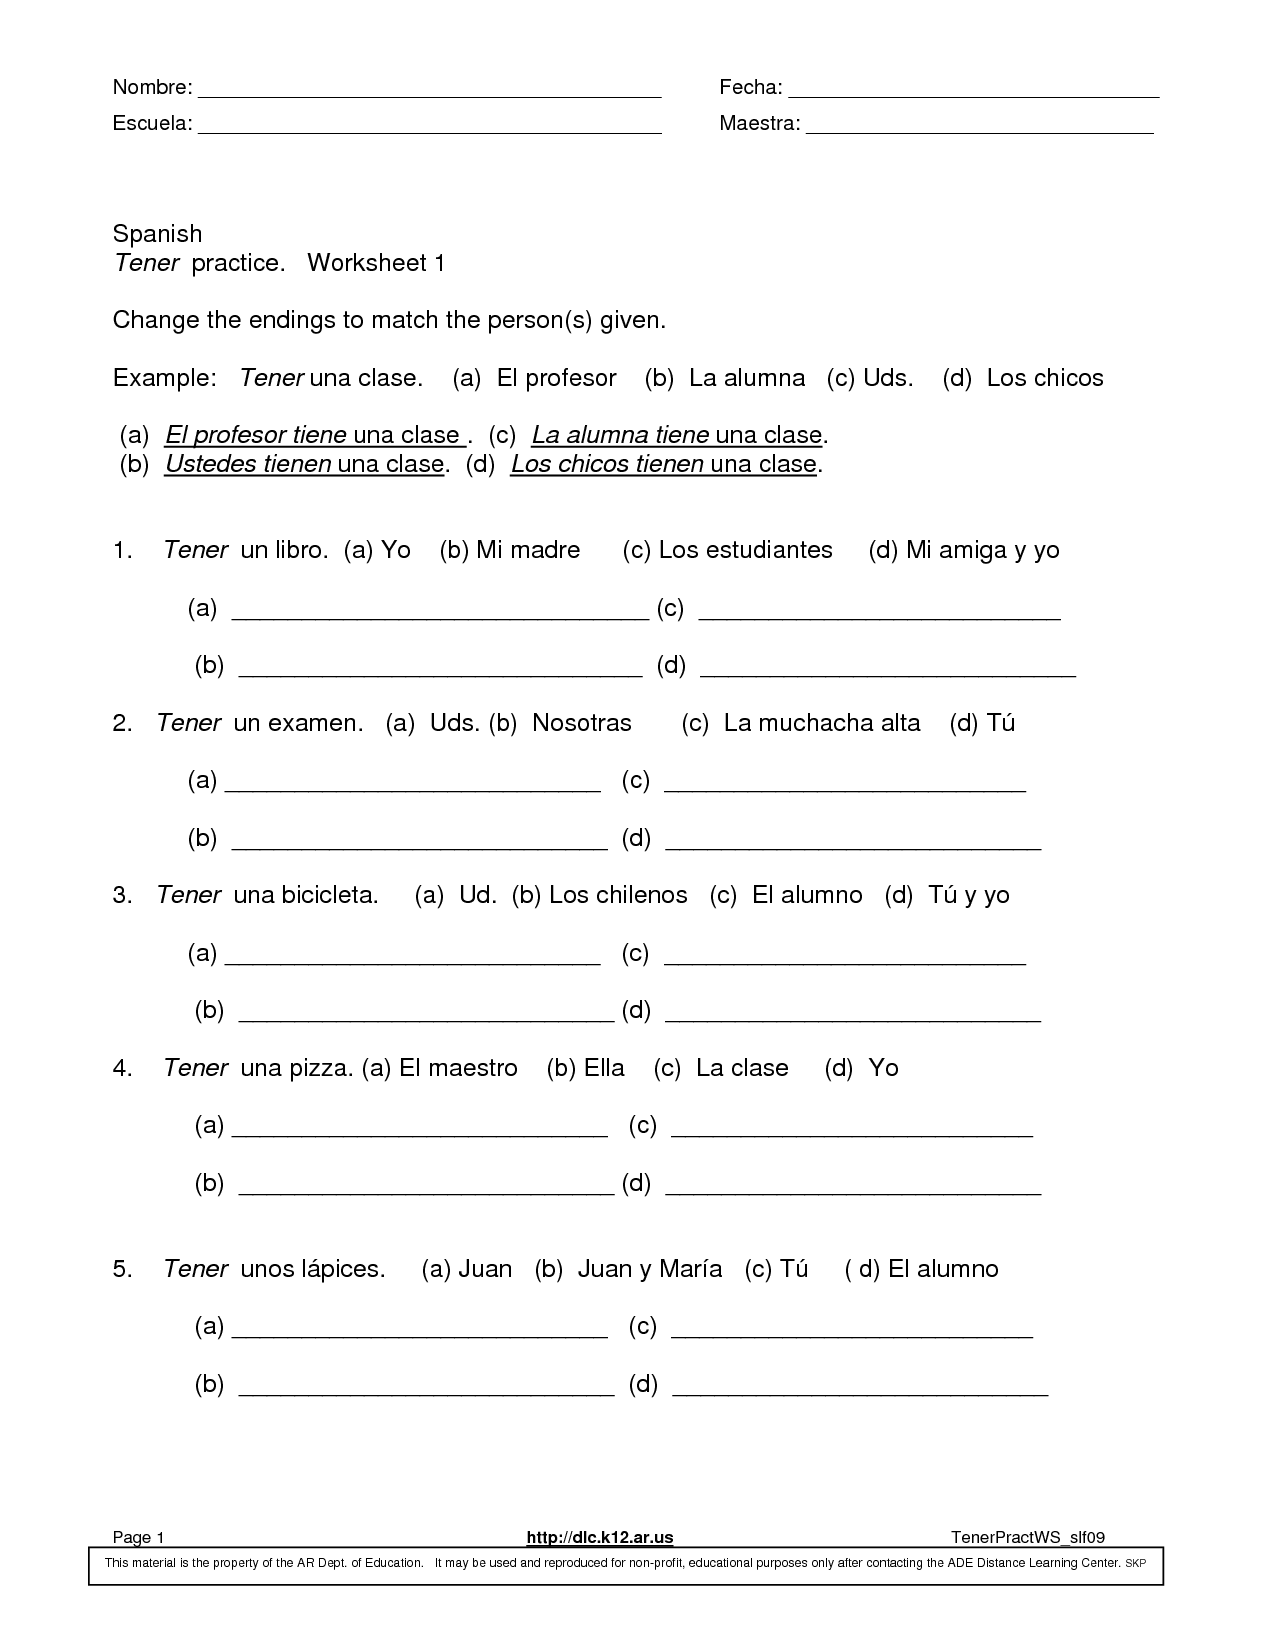 17 Best Images Of Spanish 1 Practice Worksheets Spanish Practice Worksheets Spanish Numbers